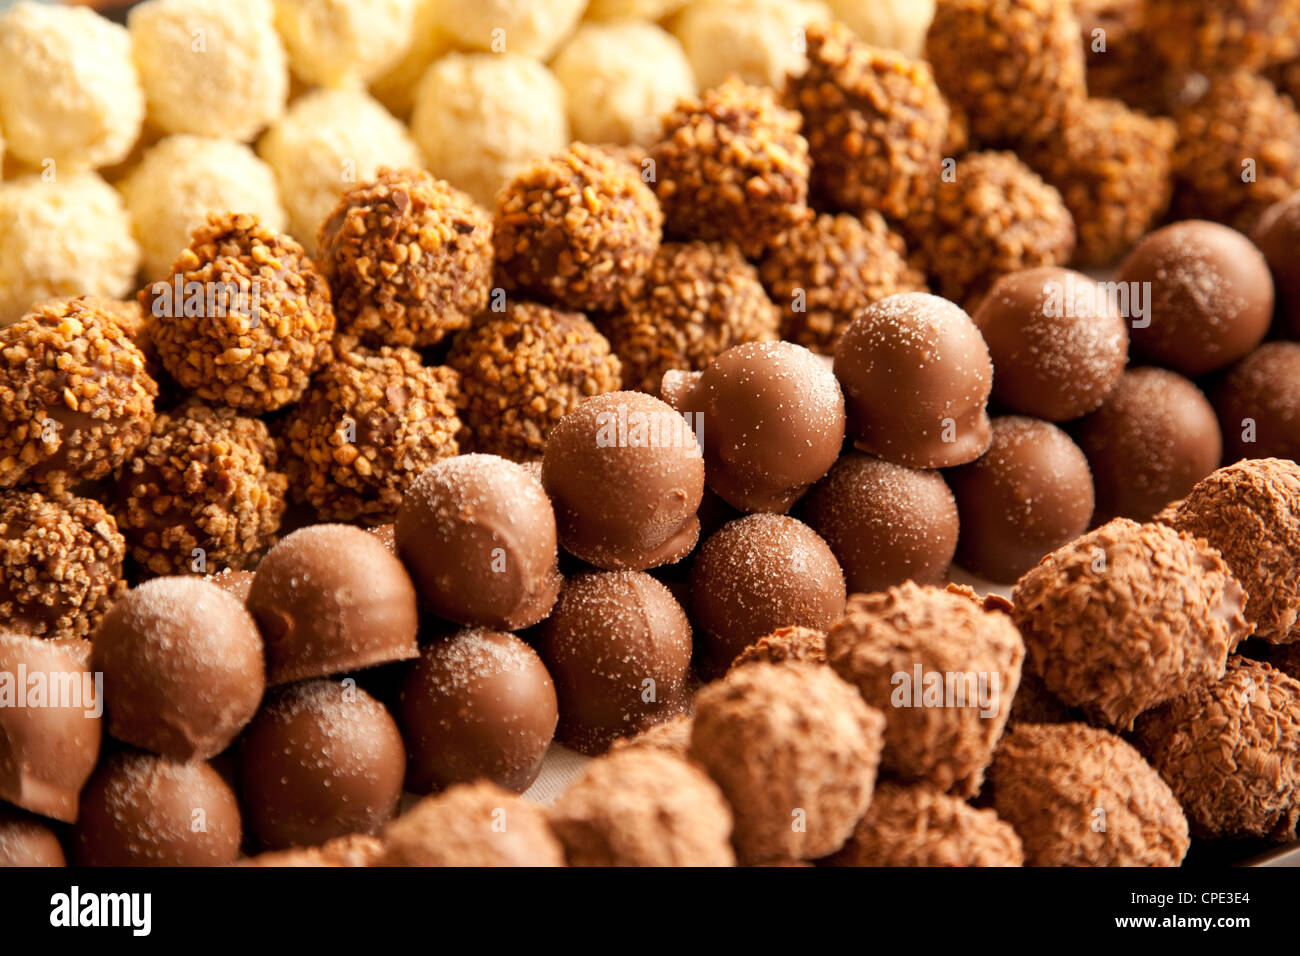 Rows of chocolates in a French cafe, France, Europe Stock Photo